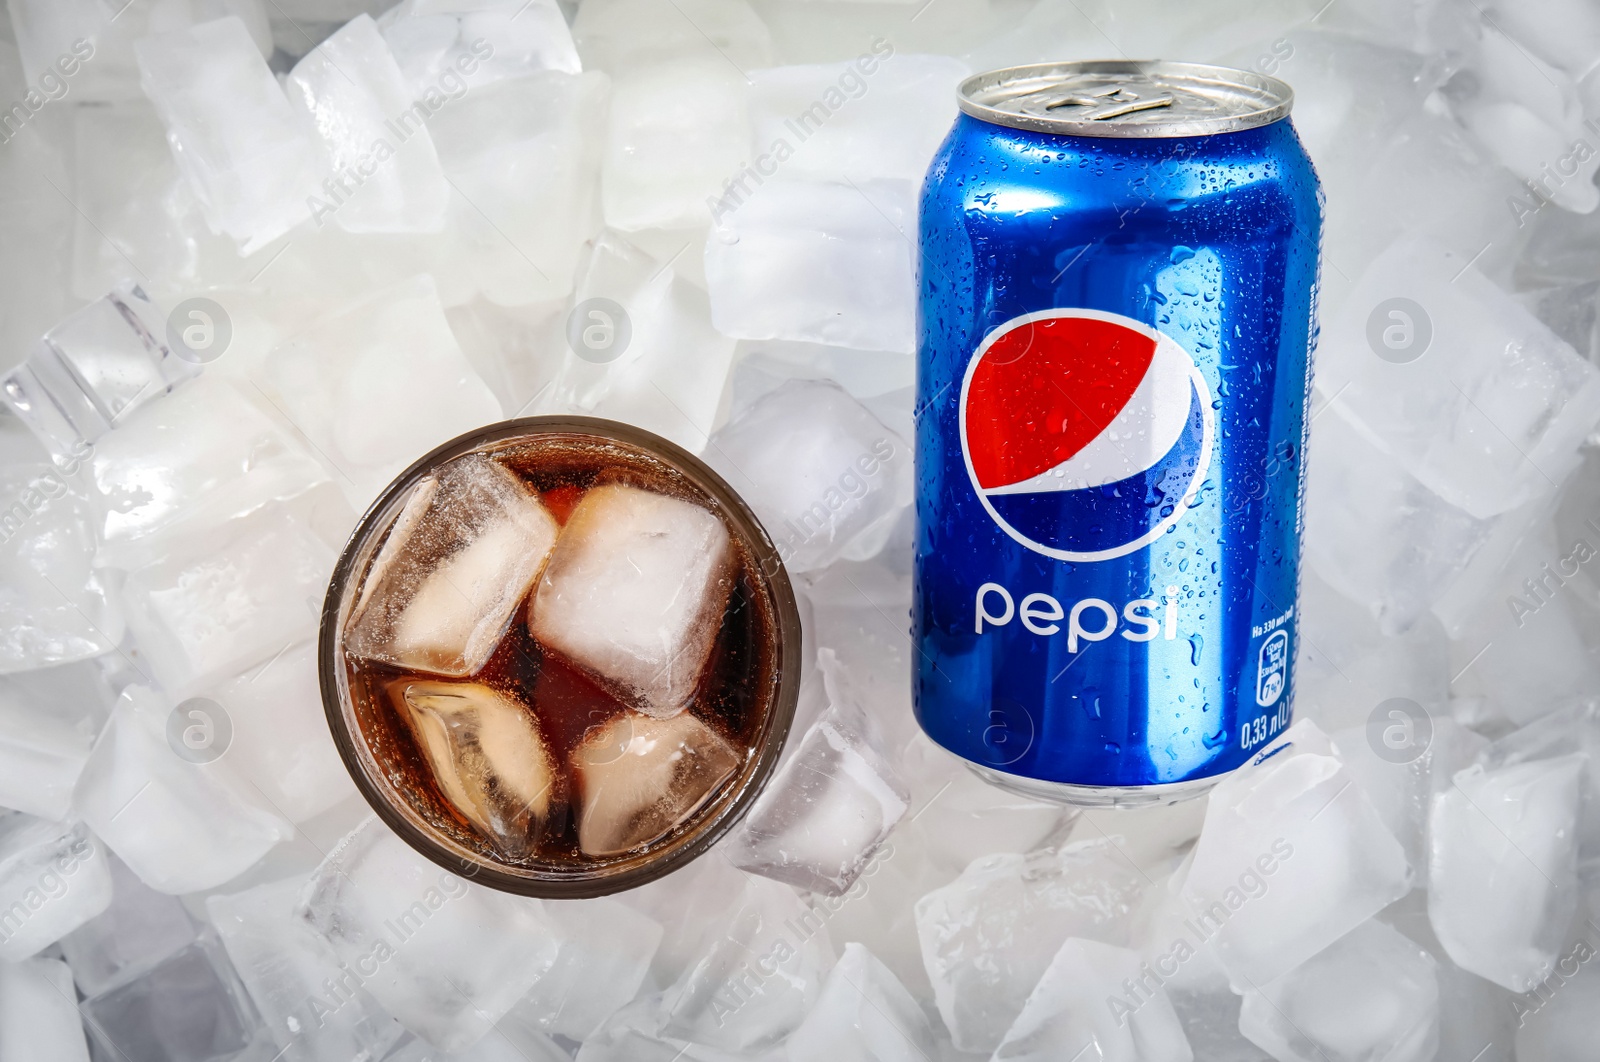 Photo of MYKOLAIV, UKRAINE - FEBRUARY 11, 2021: Glass of Pepsi and can on ice cubes, flat lay